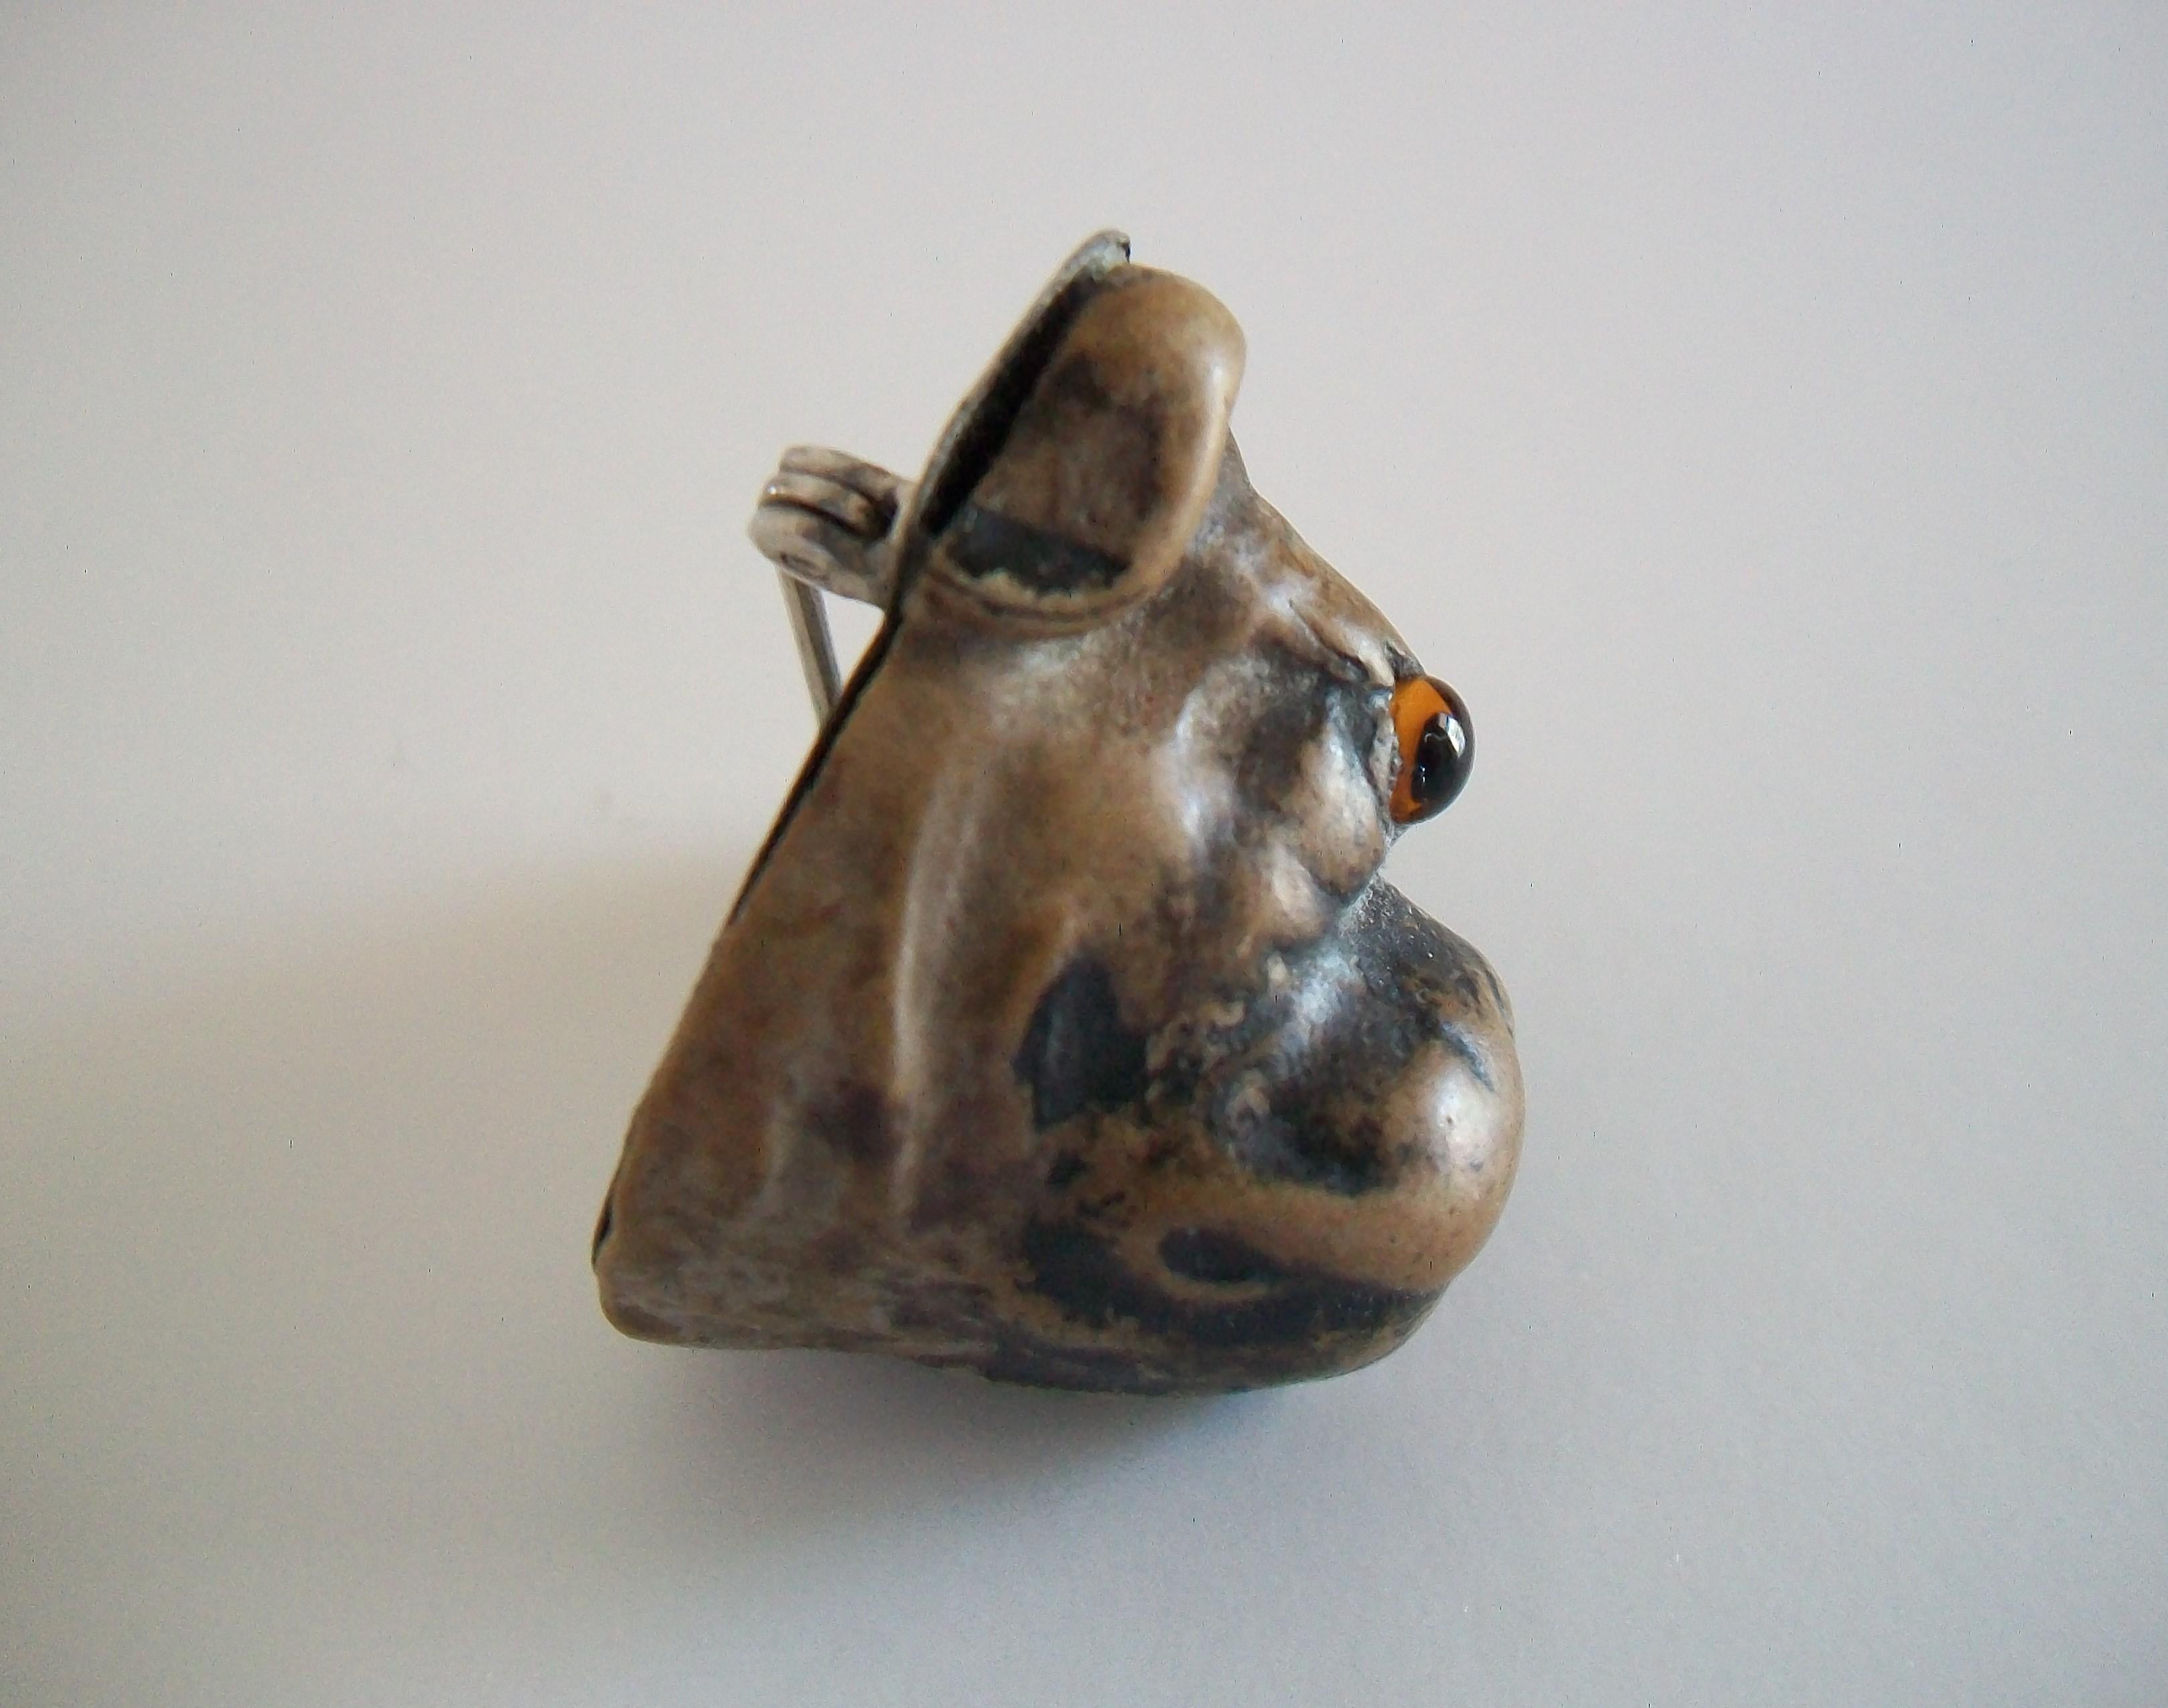 Vintage Glazed Ceramic 'Bull Dog' Brooch/Pin - Glass Eyes - Early 20th Century For Sale 1